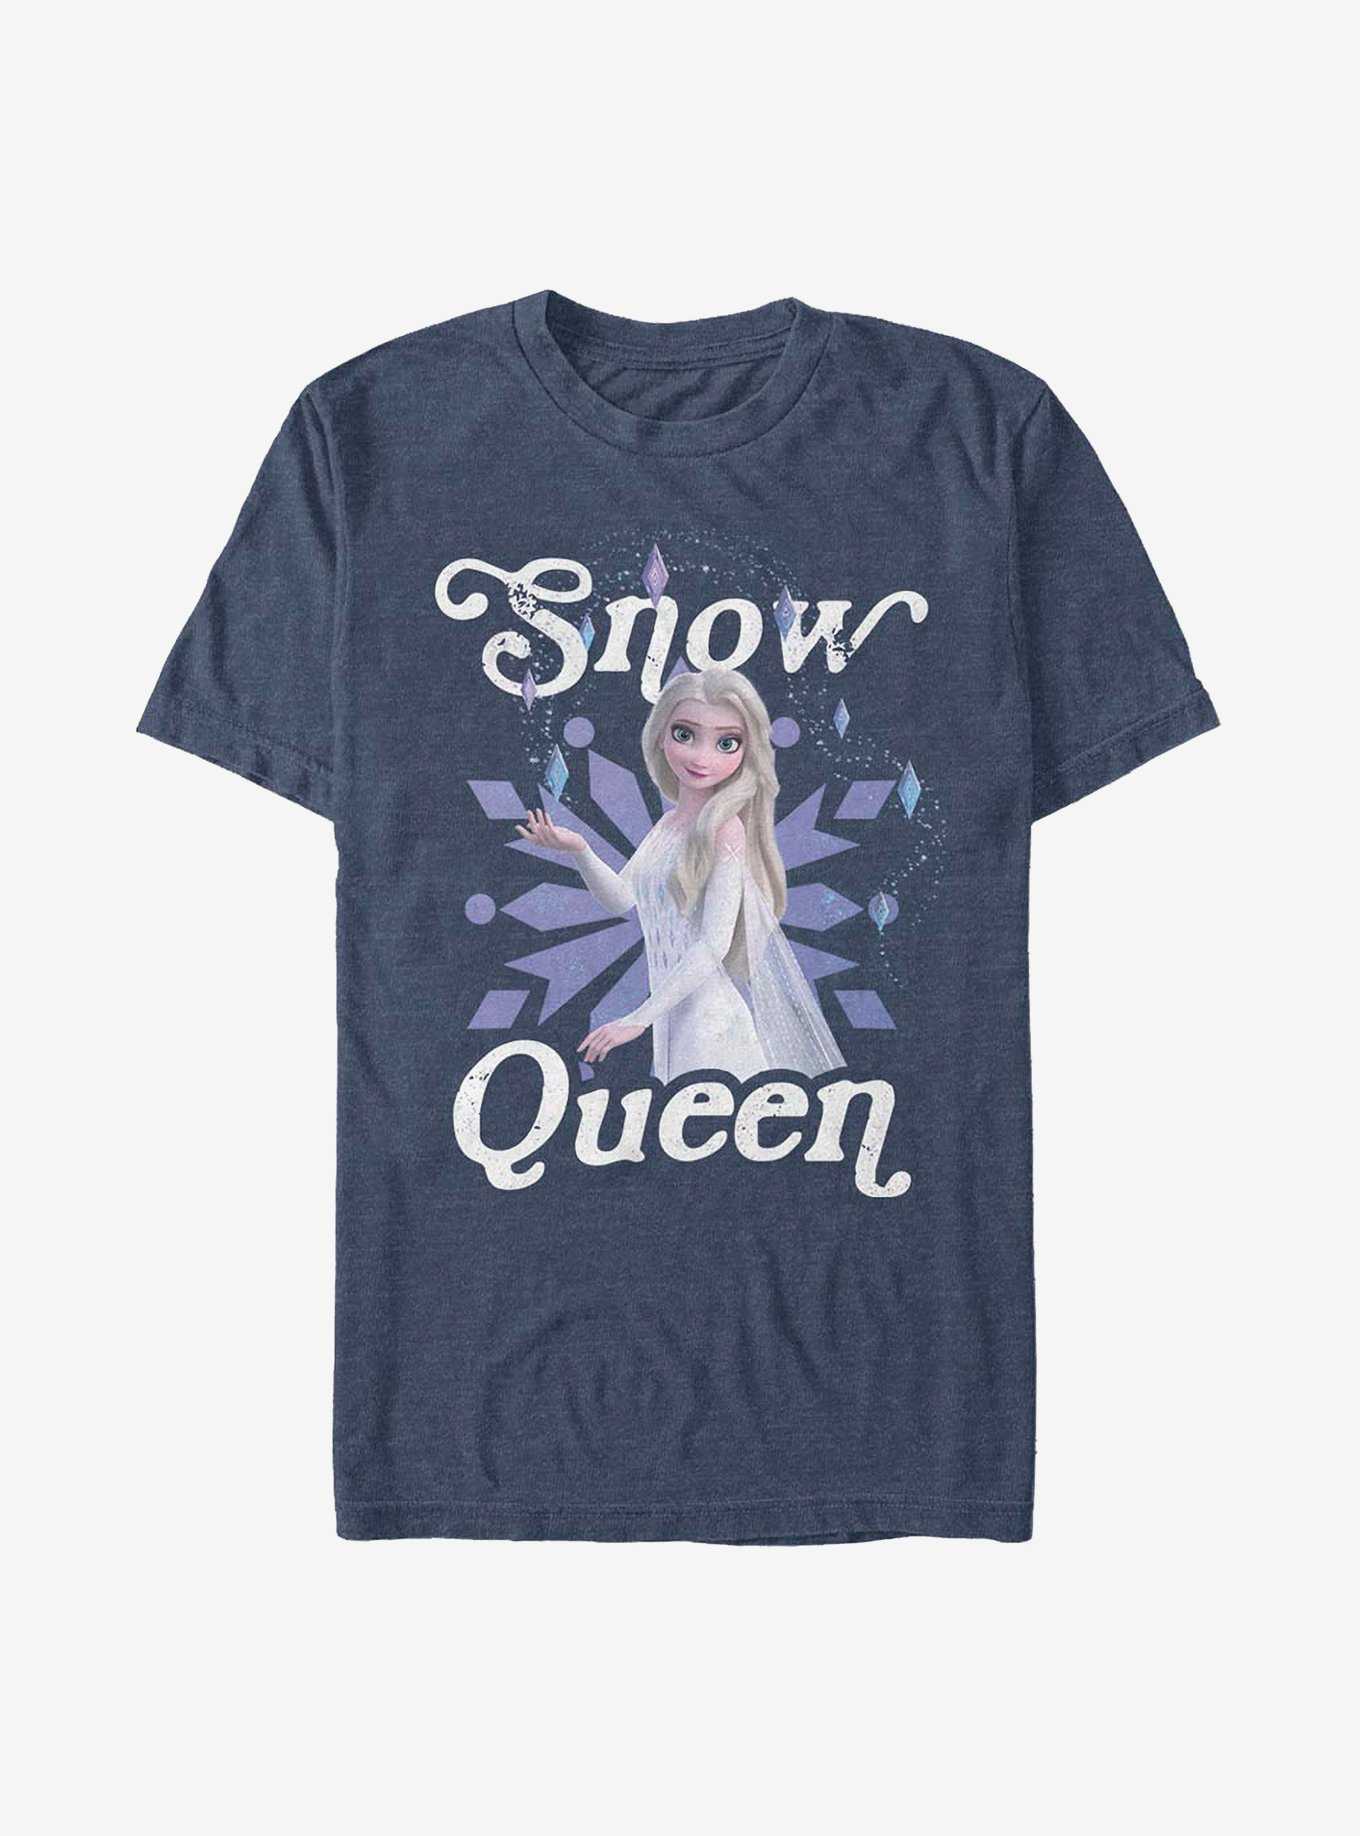 OFFICIAL Frozen Merchandise, Shirts & Clothing | Hot Topic